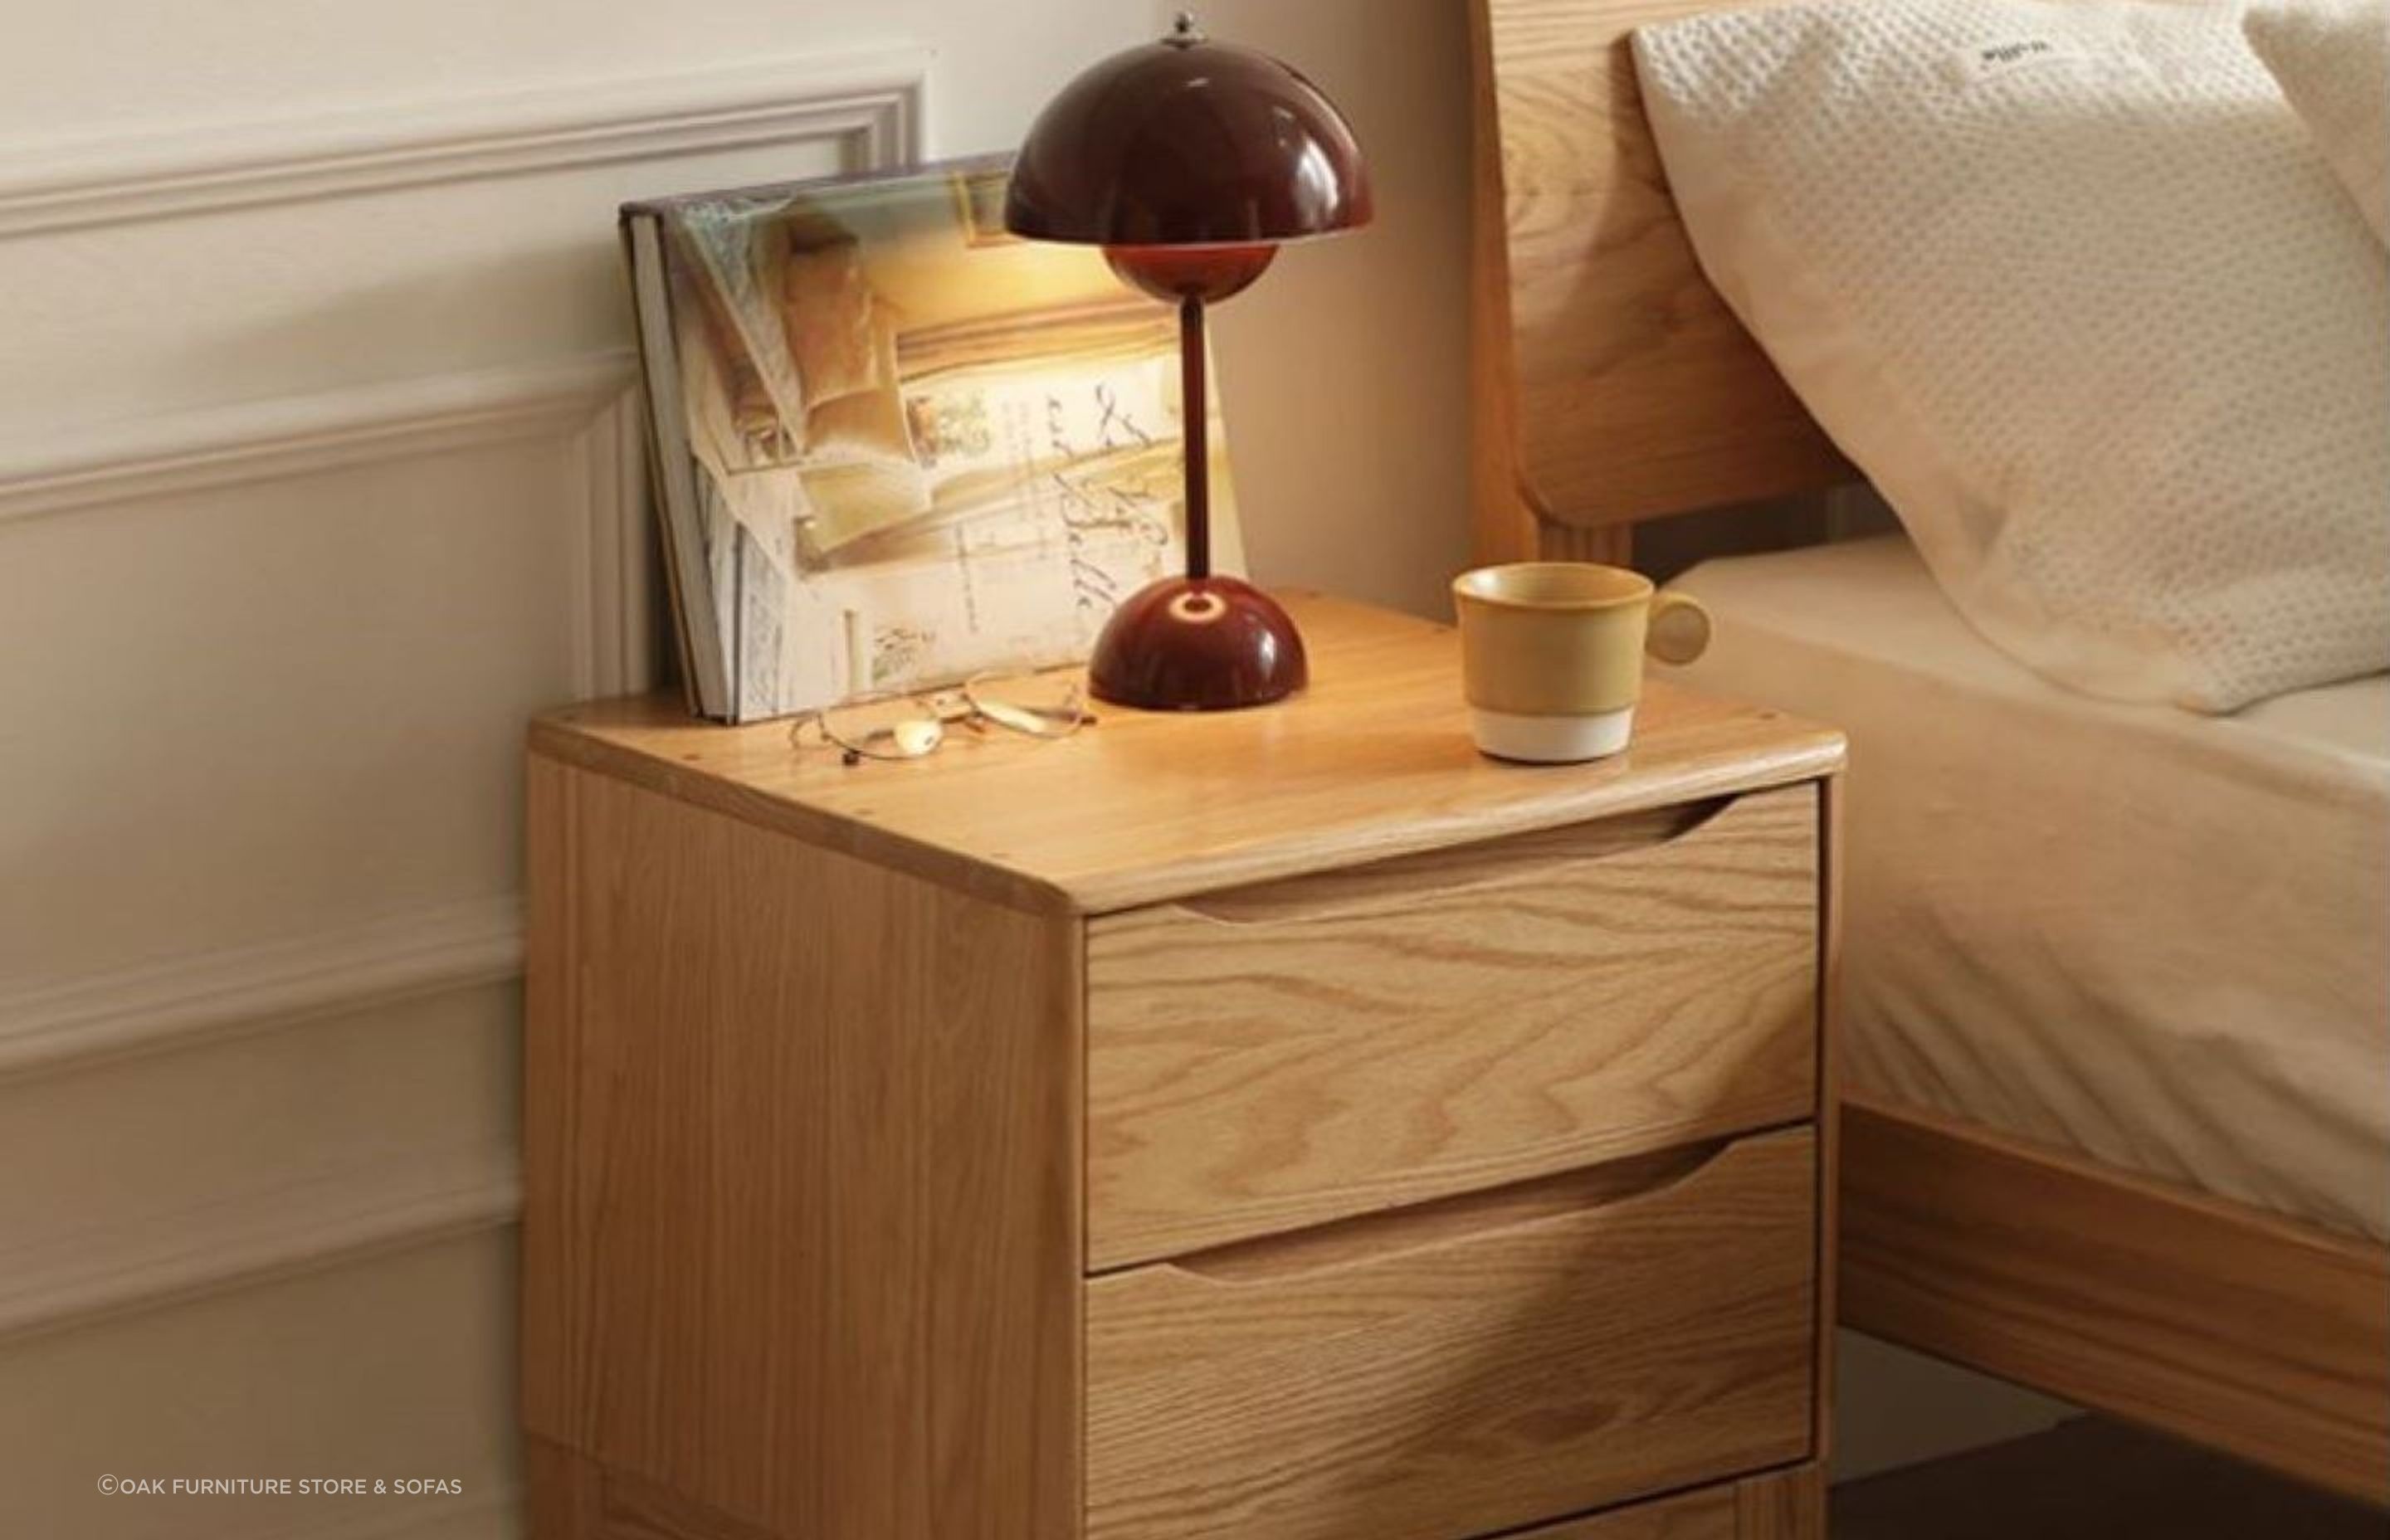 The beautiful natural grain of oak, seen here with the Berlin Natural Solid Oak Bedside Table, brings uniqueness and warmth to a bedroom.